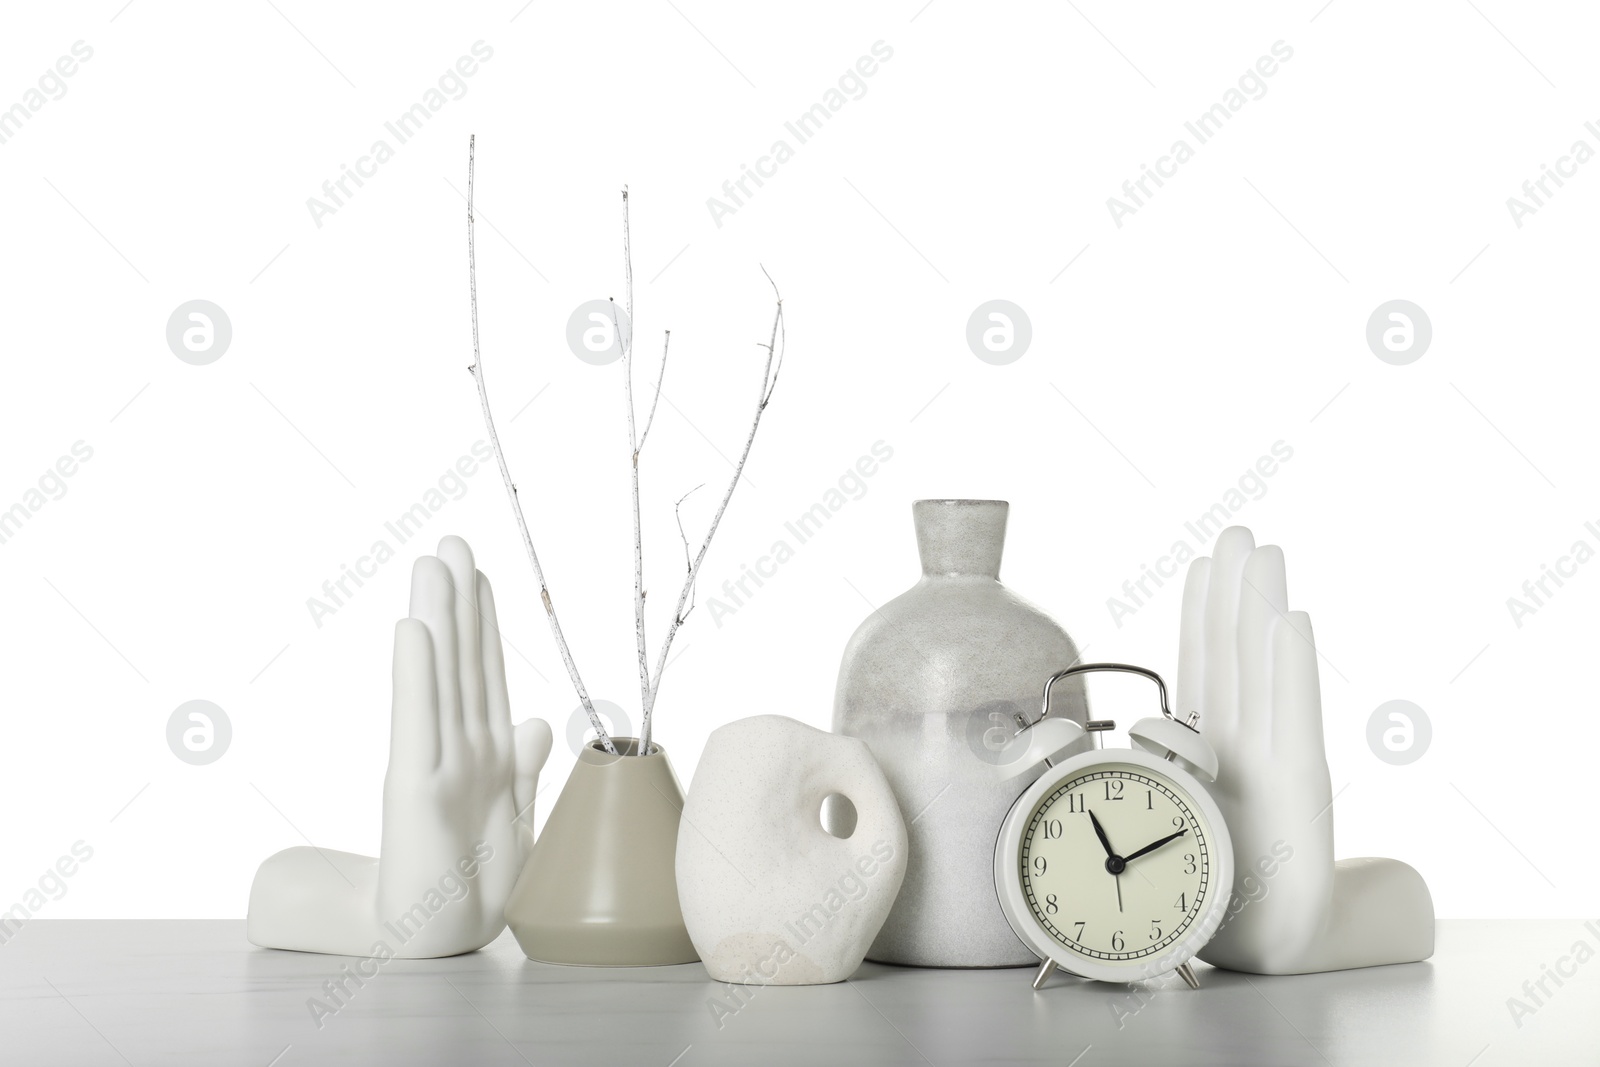 Photo of Different stylish vases, alarm clock and other decor elements on table against white background